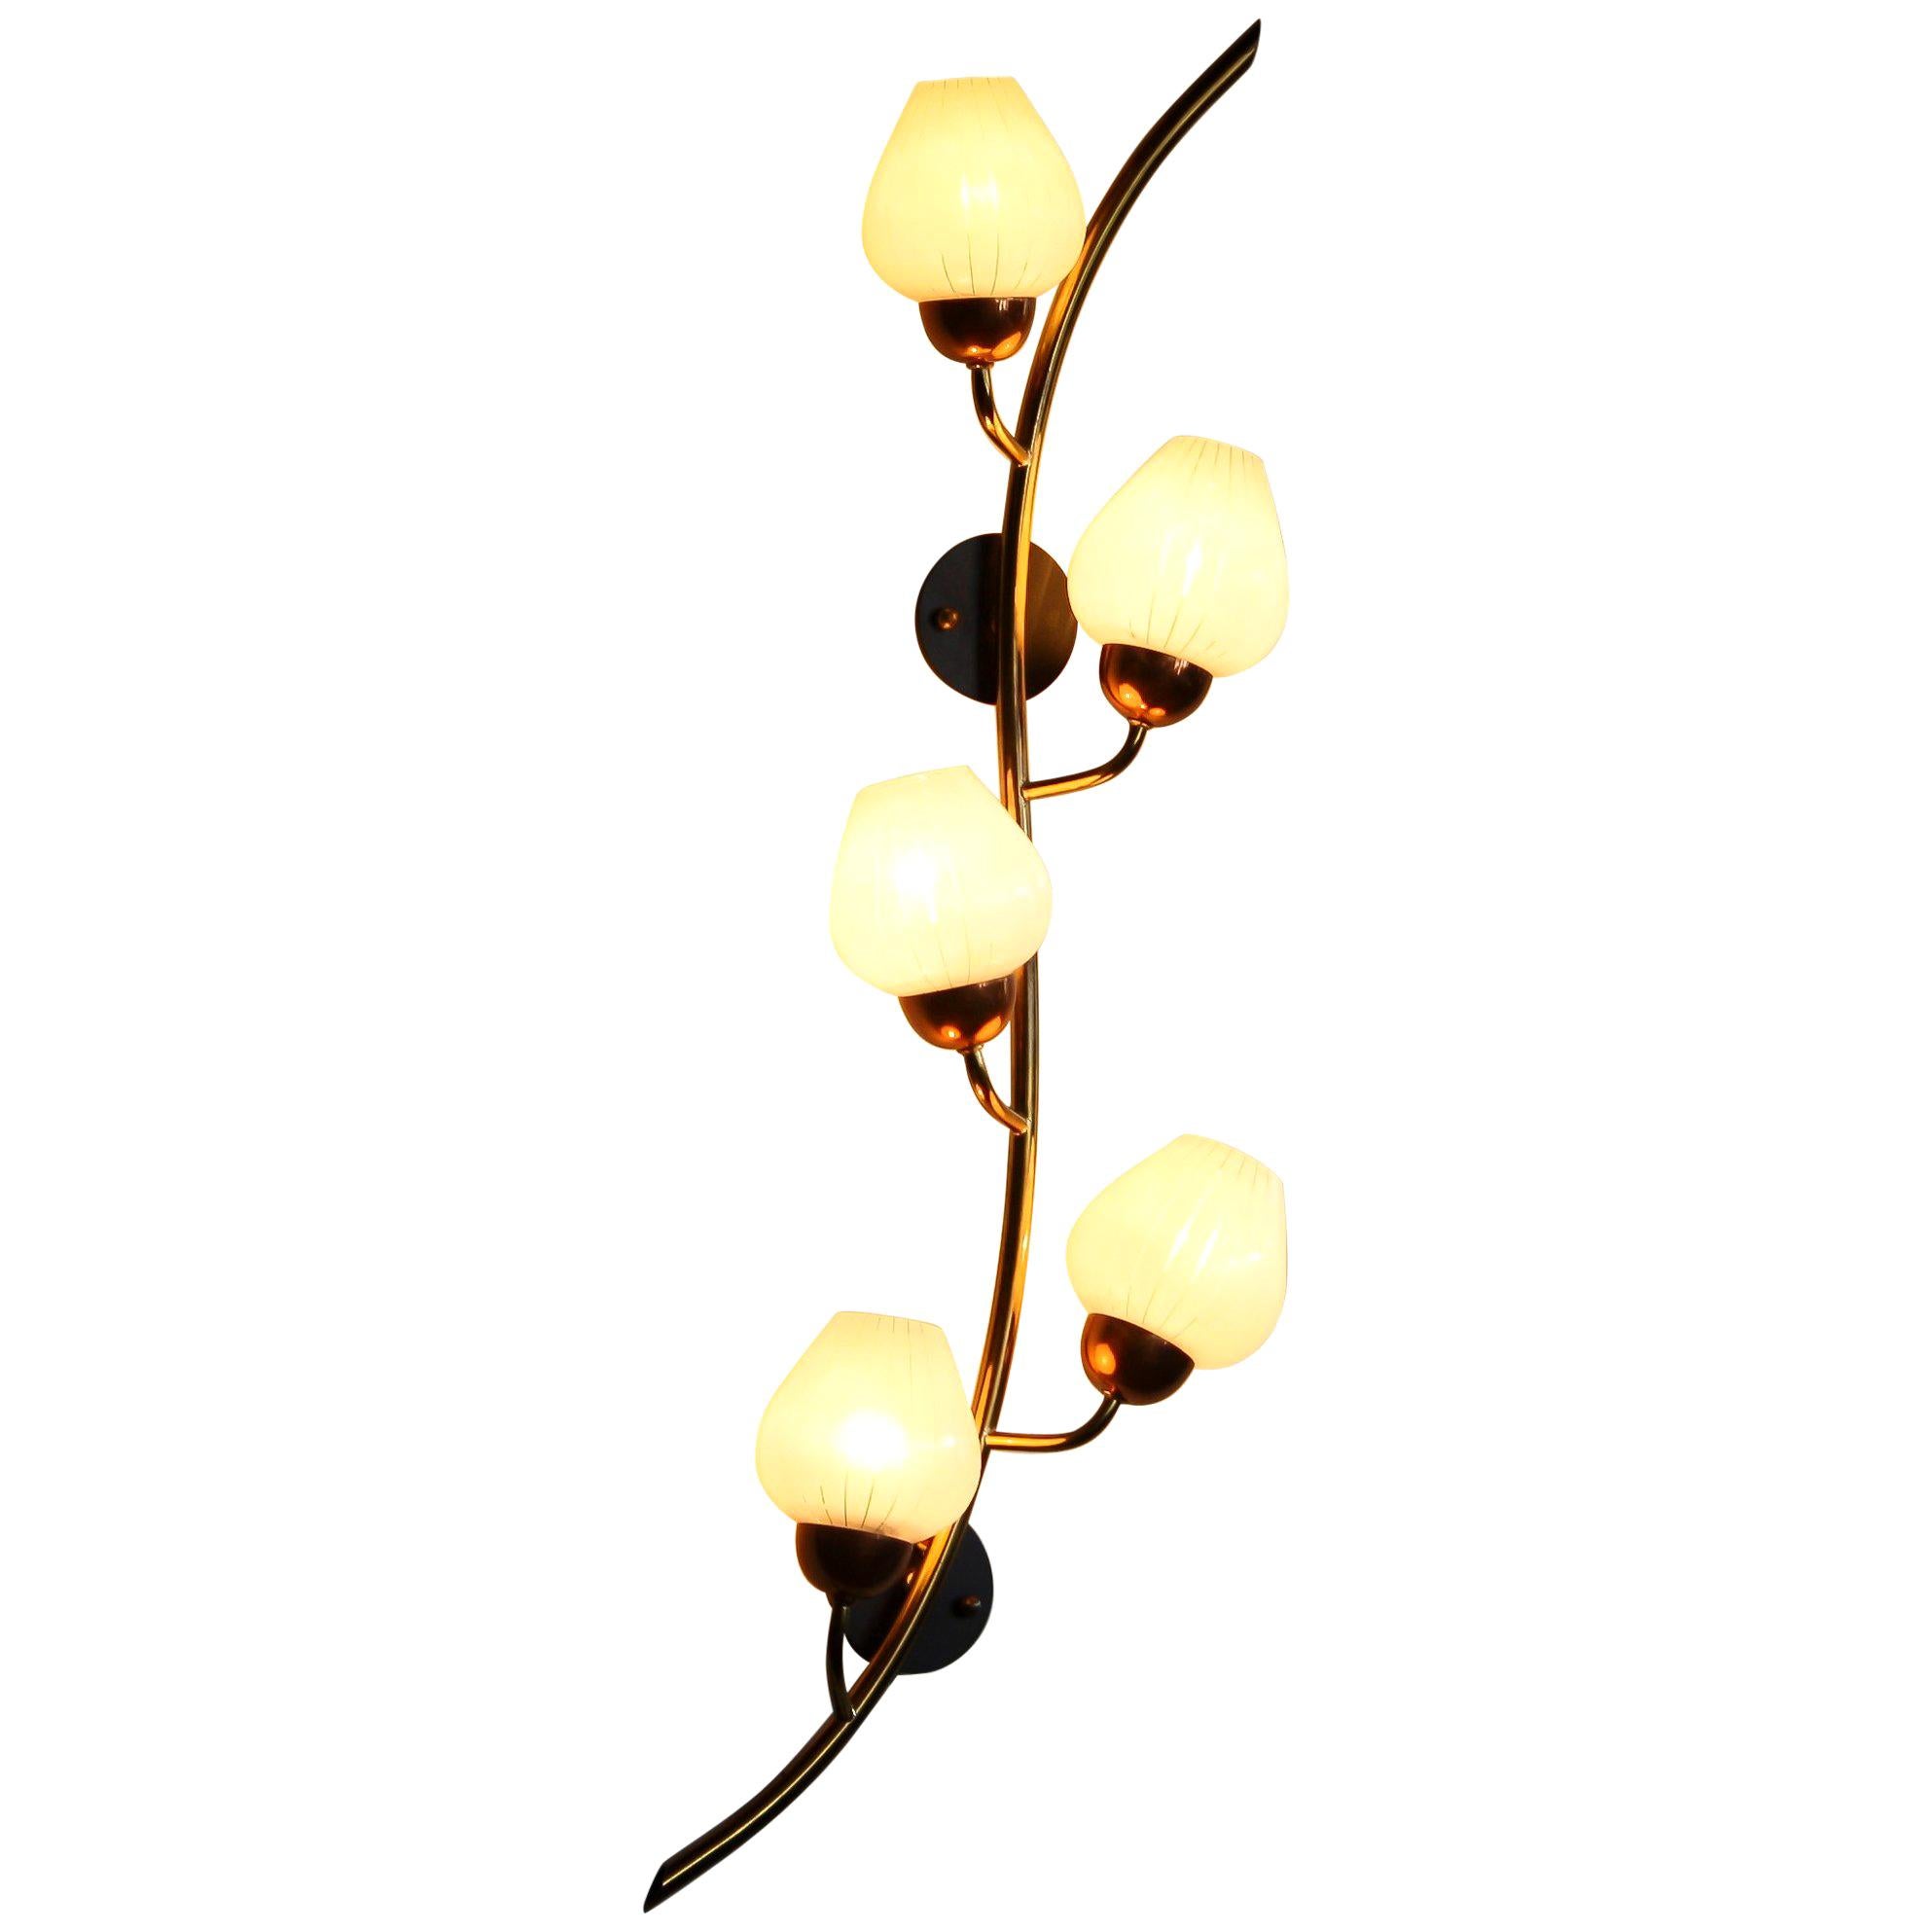 Beautiful brass wall light from Sweden.
This lamp consists of a copper base with five white glass shades like a branch with berries.
The shades have transparent lines making it a nice shining light.
The lamp is in a very nice and functional